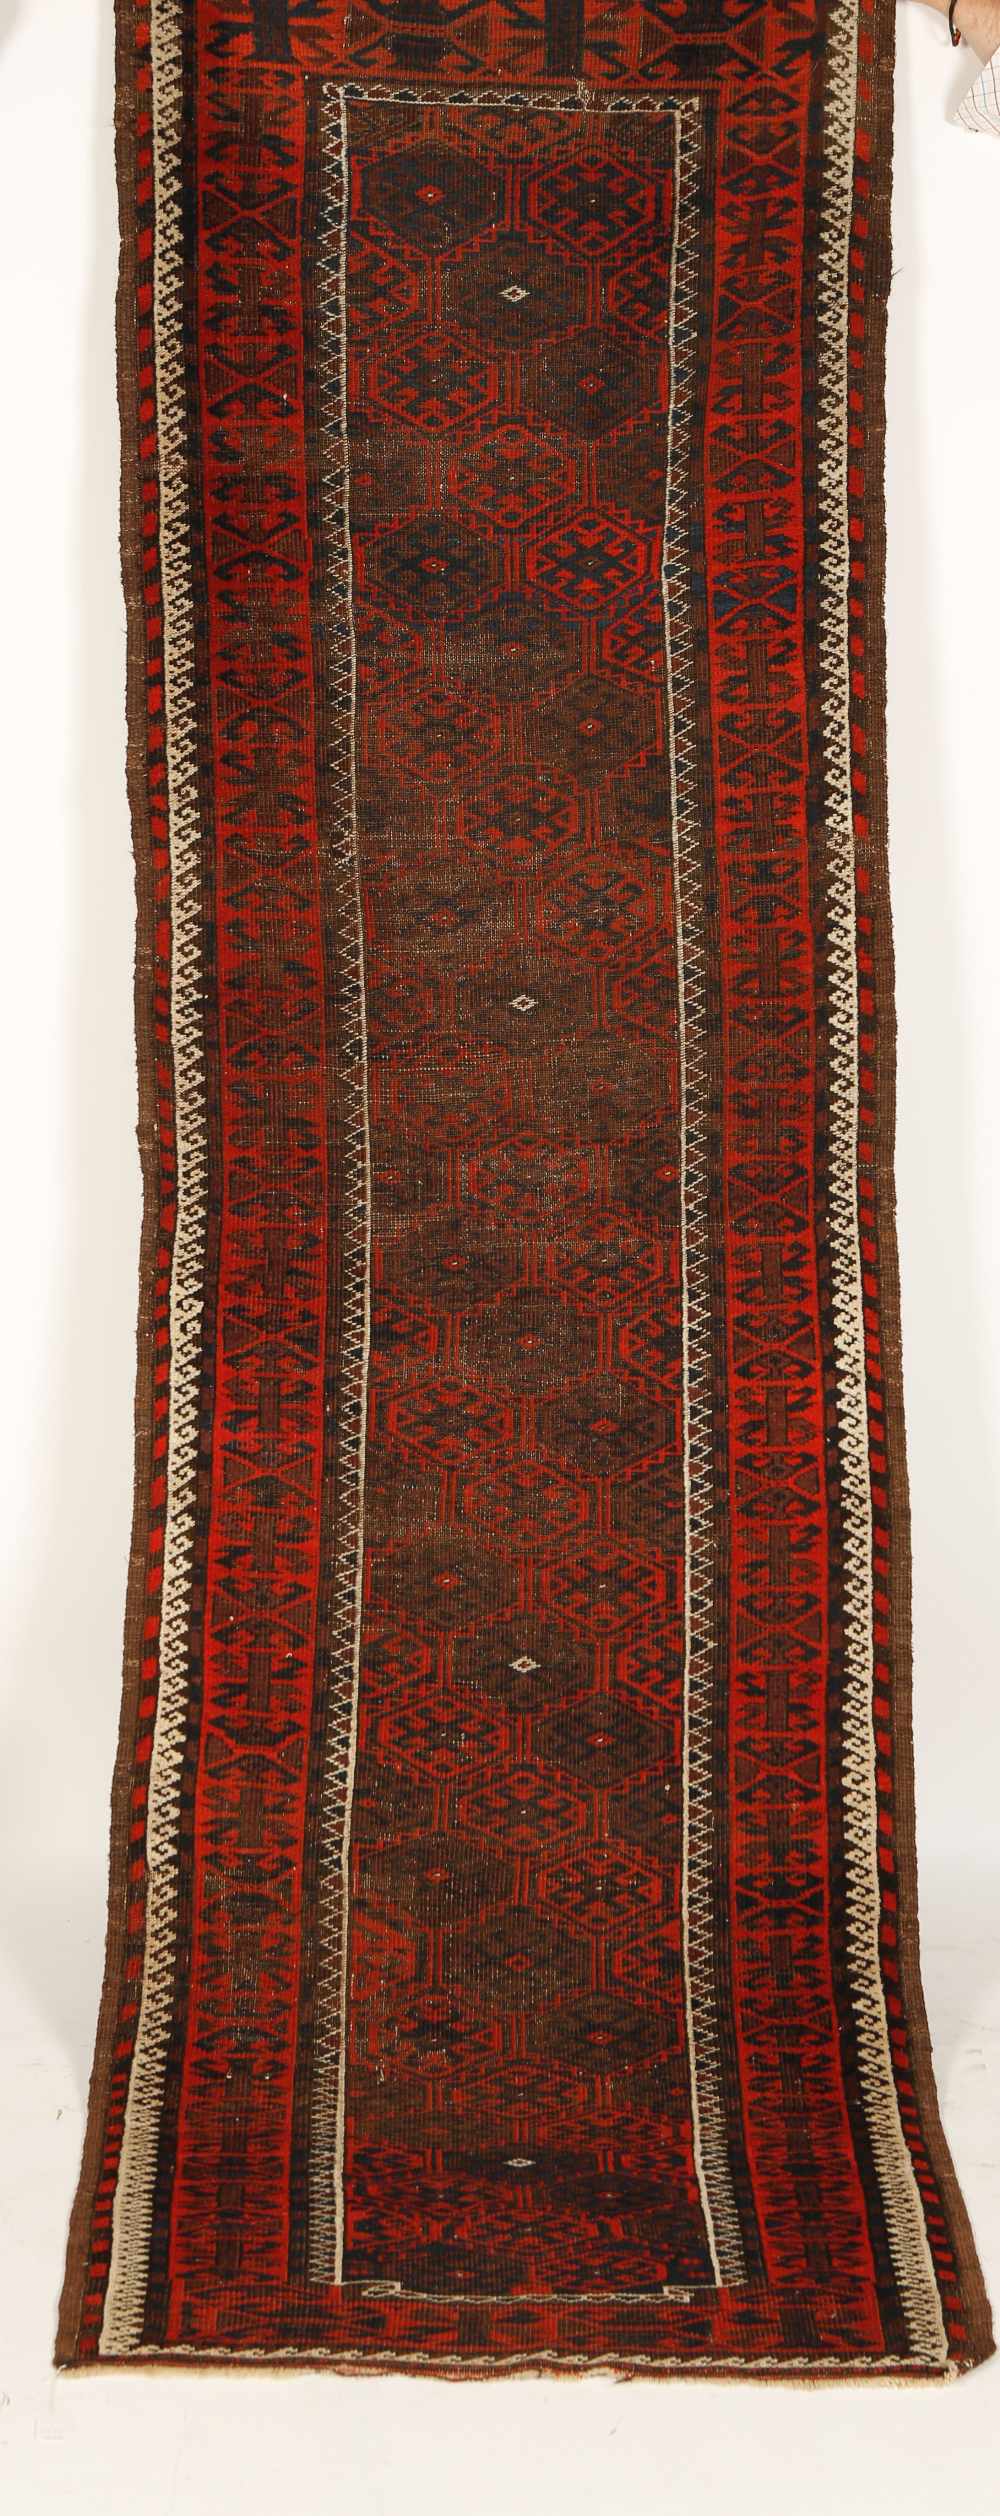 A TEKKE TYPE RUNNER worked with repeating hexagonal motifs in red and brown against a dark ground